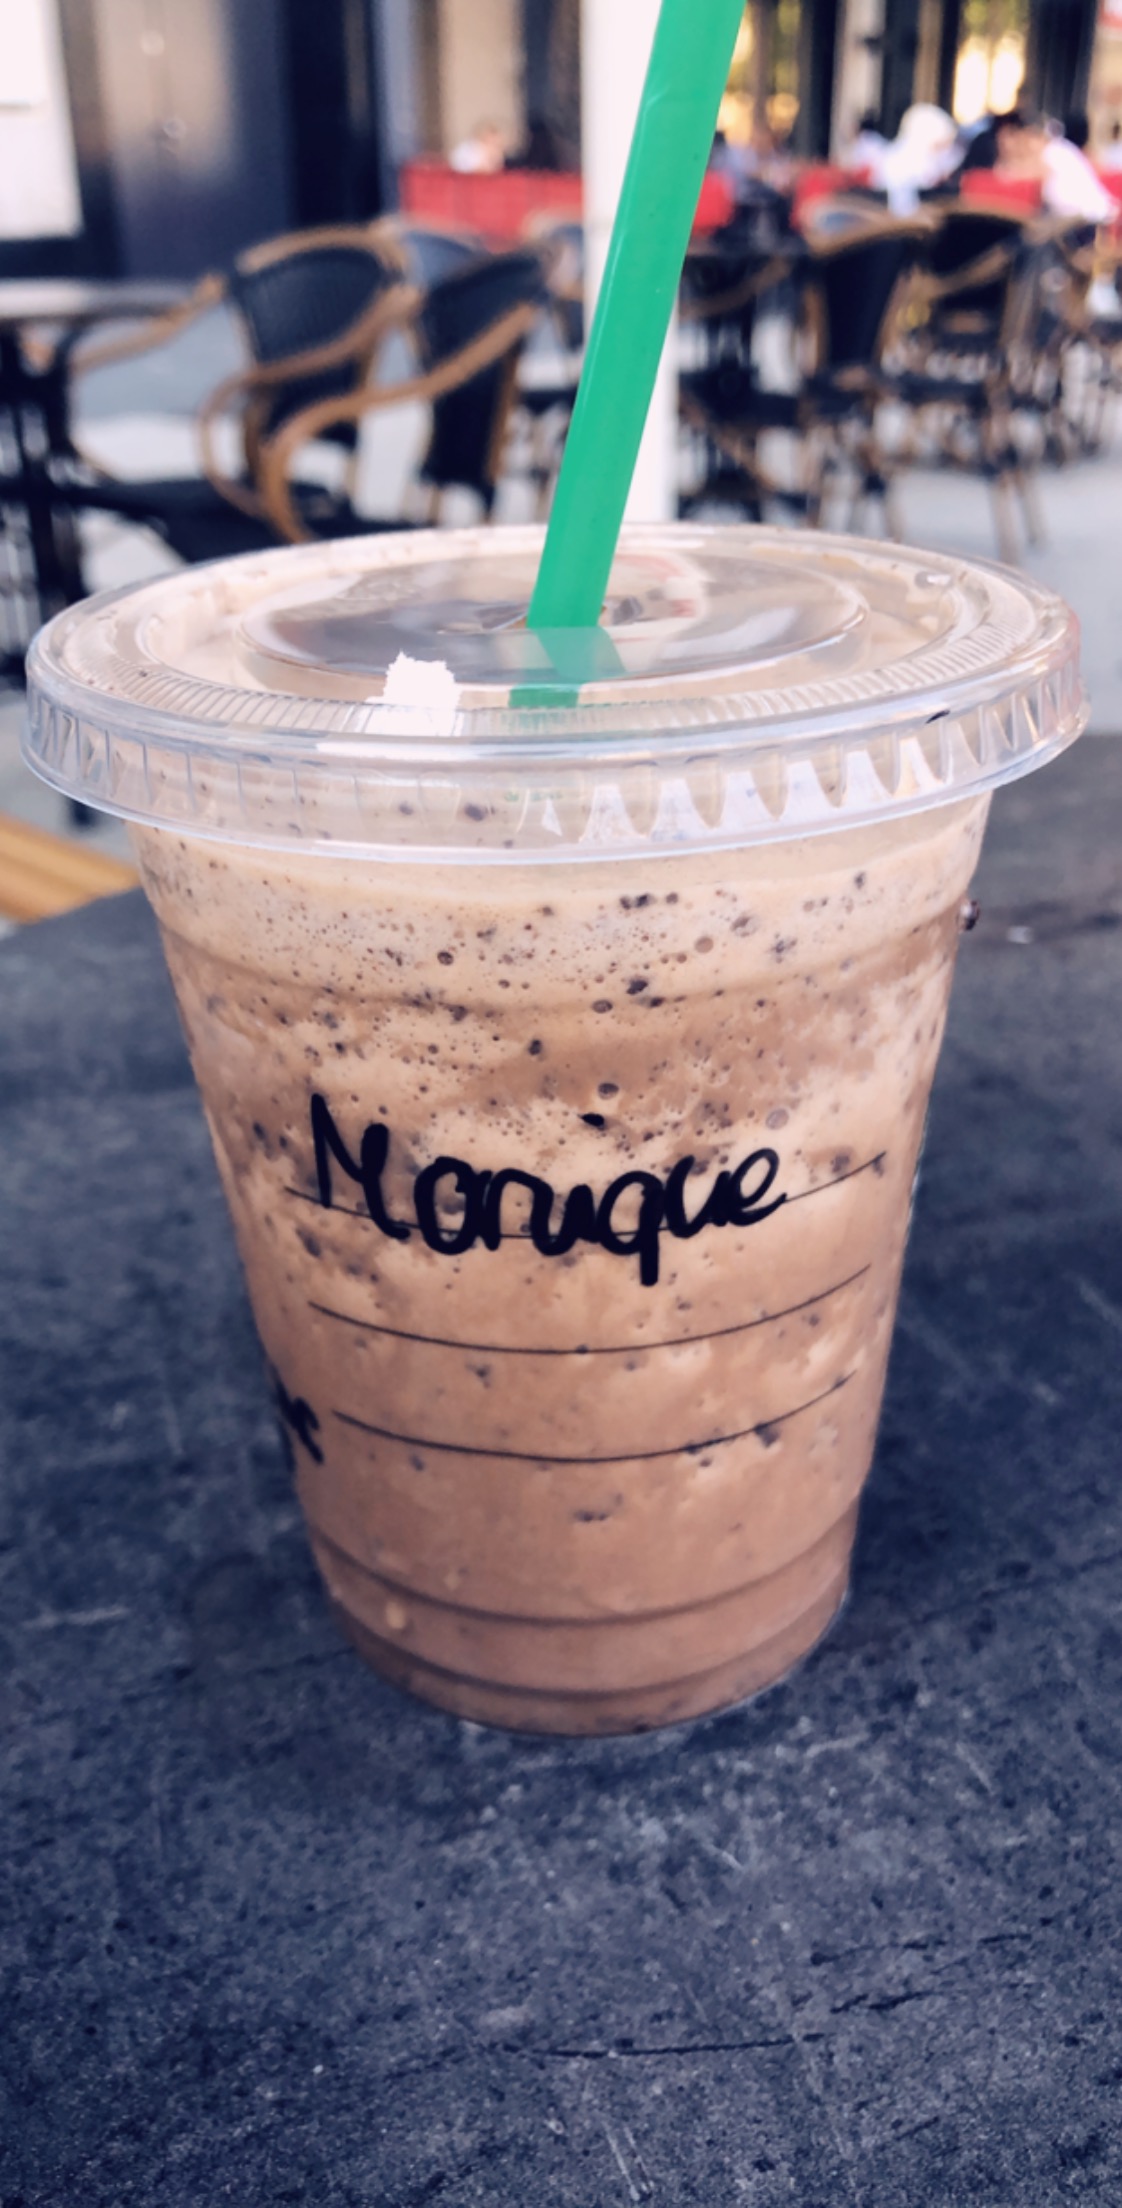 Starbucks Frappucino cup with the name Monique on it